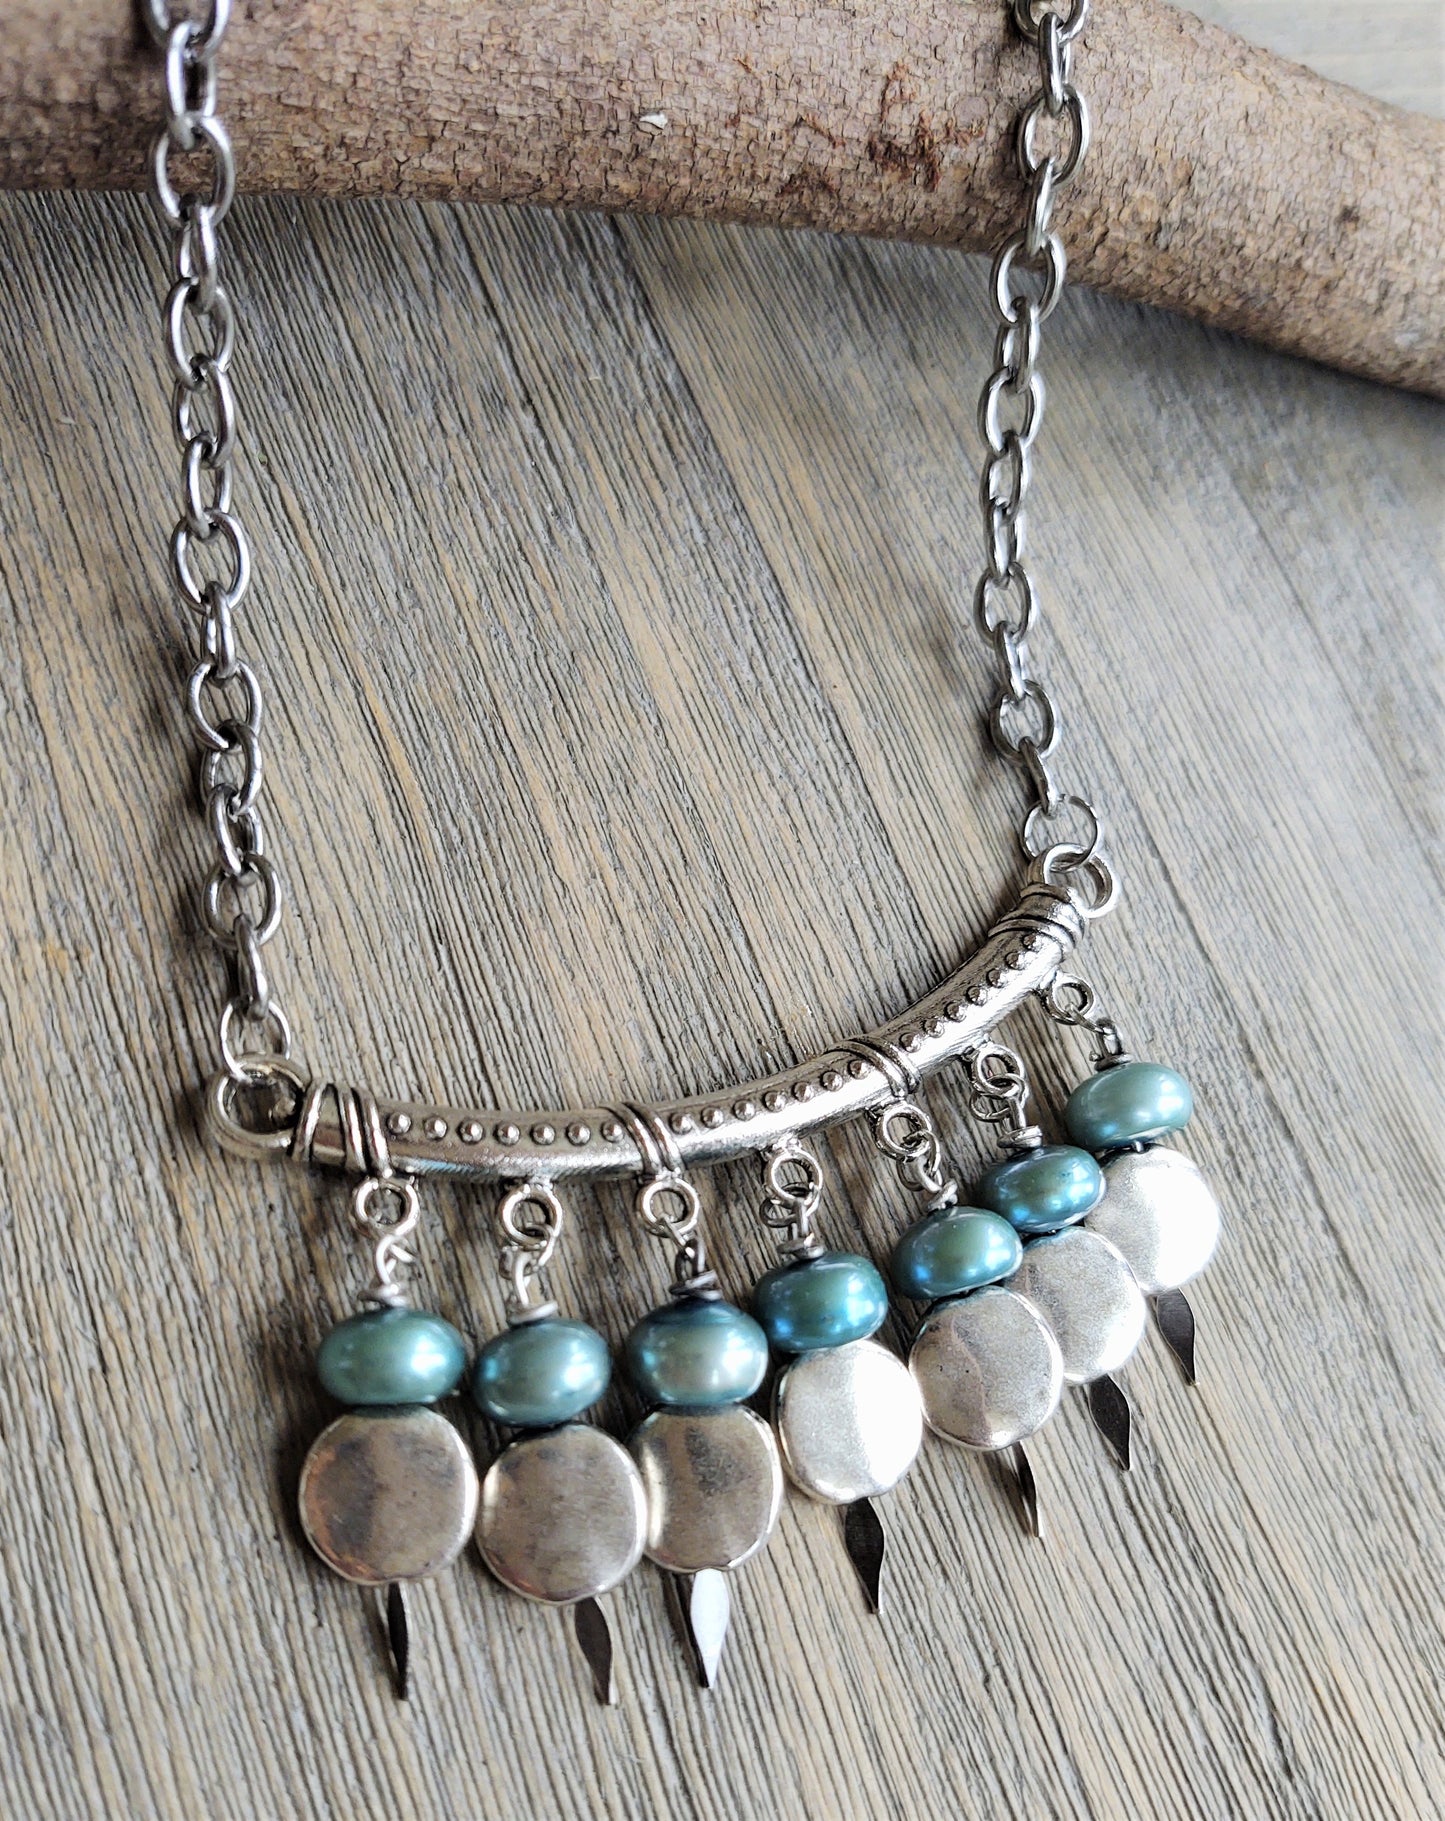 June in the Mountains {necklace}